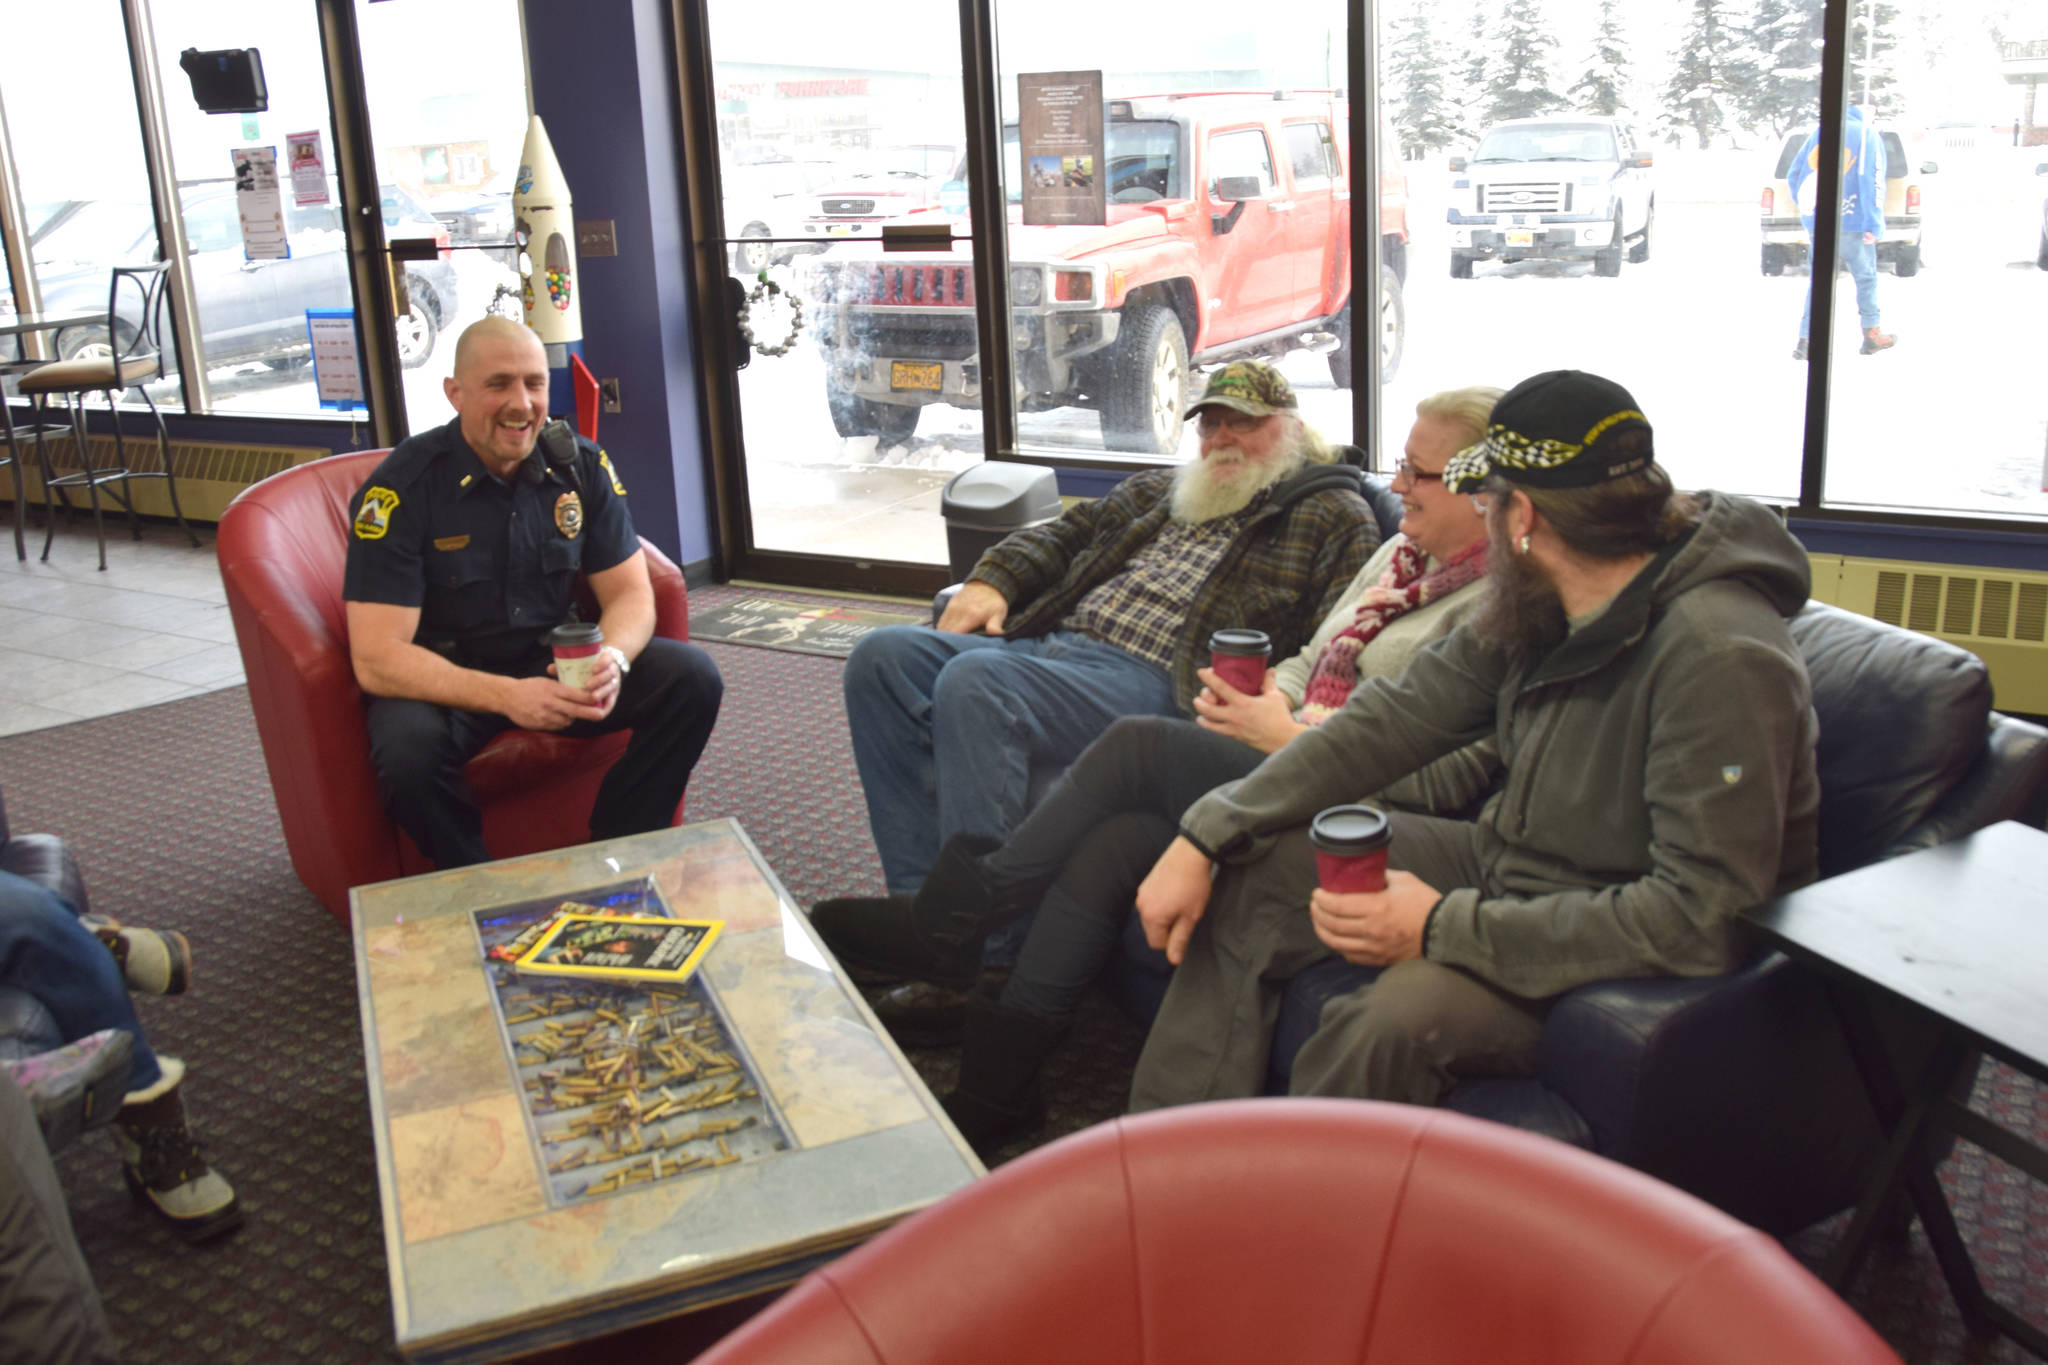 Lt. Ben Langham of the Kenai Police Department shares a laugh with members of the community at Ammo Can Coffee in Soldotna on Wednesday. (Photo by Brian Mazurek/Peninsula Clarion)